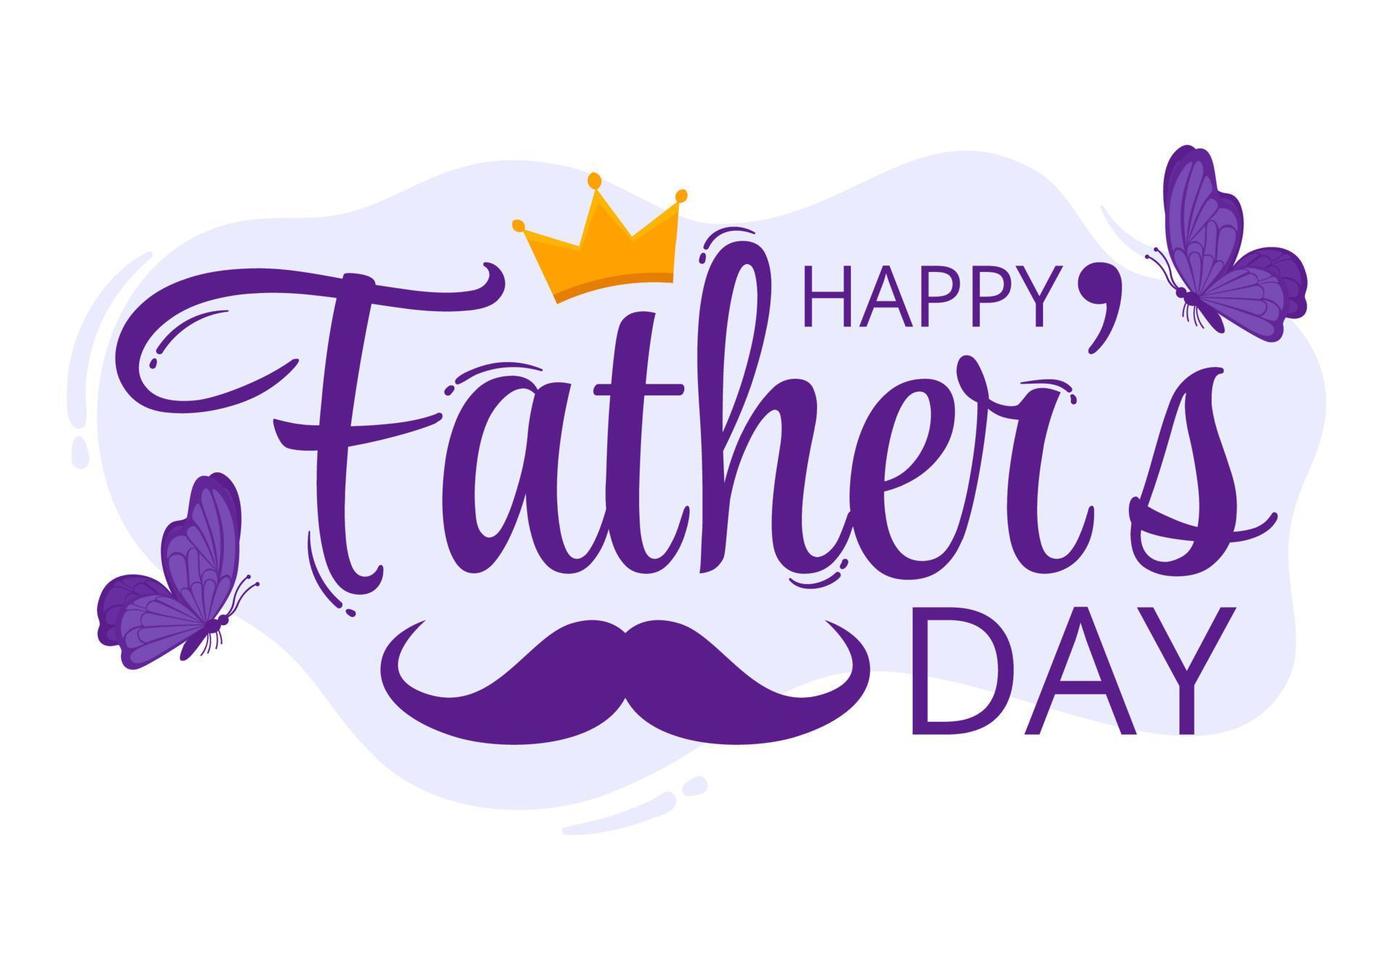 Happy Fathers Day Illustration with Father and his Son Playing Together in Flat Kids Cartoon Hand Drawn for Web Banner or Landing Page Templates vector